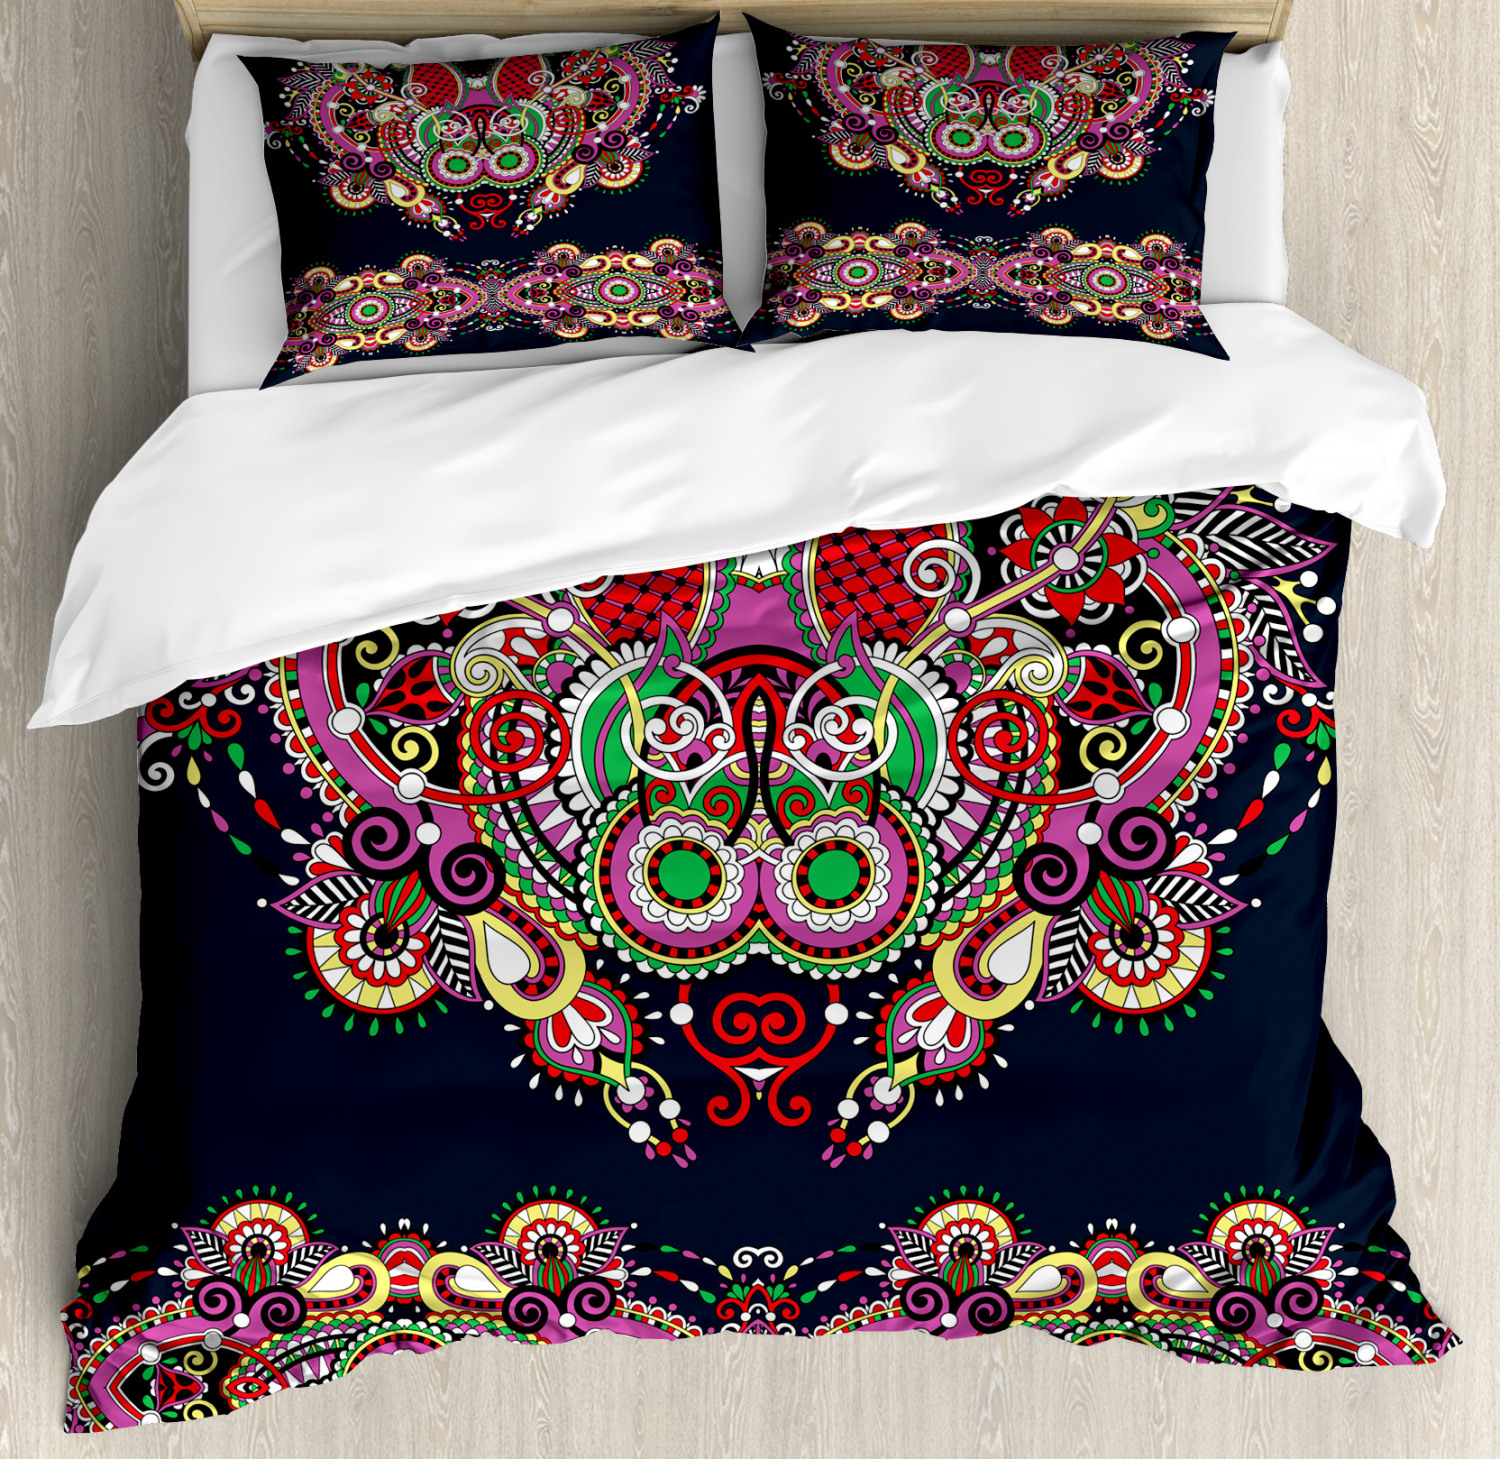 Ethnic Duvet Cover Set With Pillow Shams Ornate Paisley Features